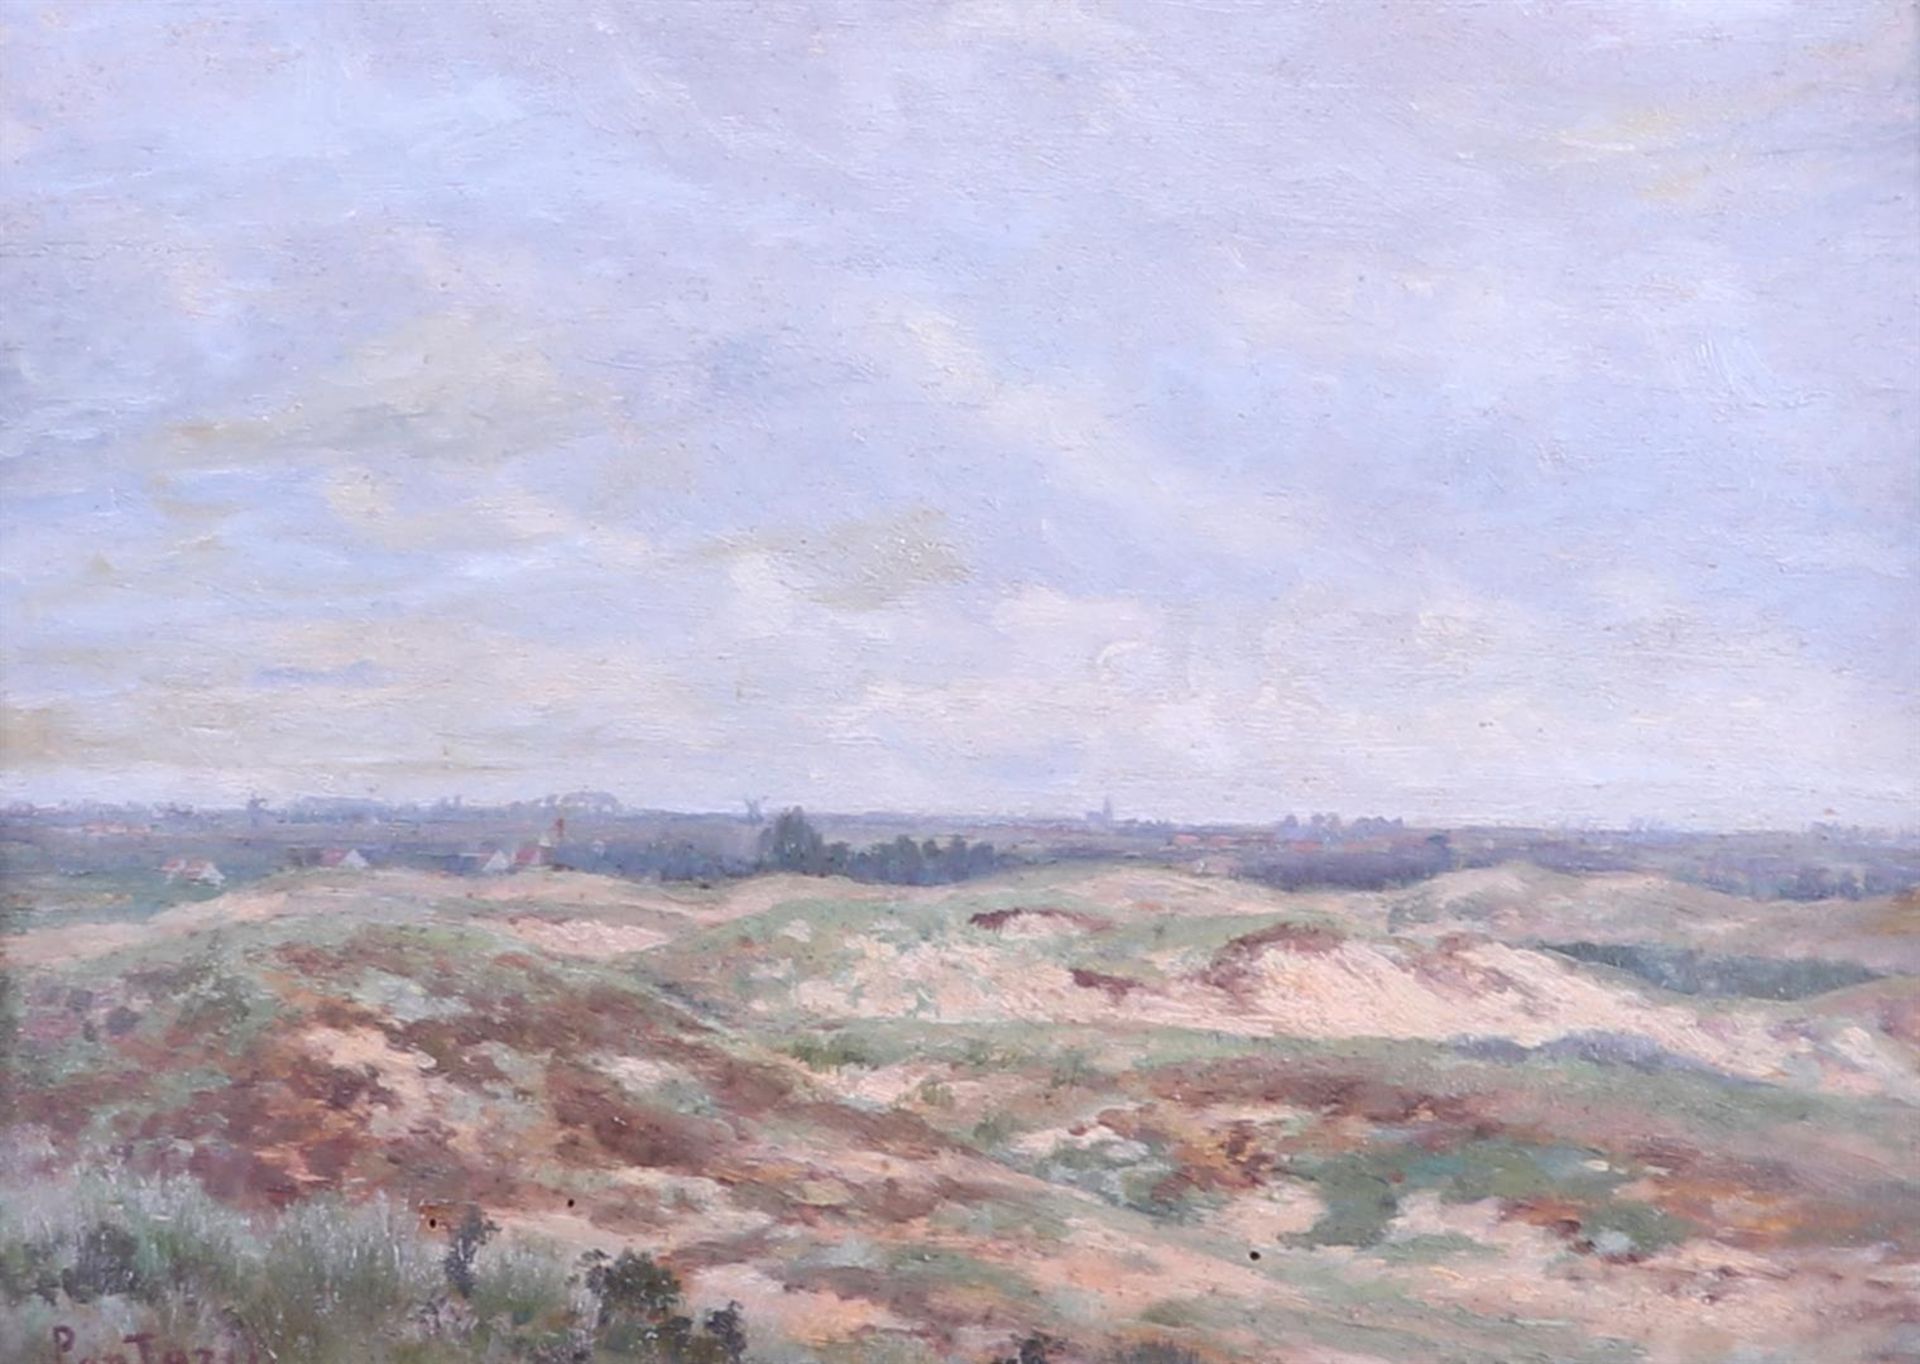 (possibly) Périclès Pantazis (Athens 1849 - 1884 Brussels), View of the dunes with a village